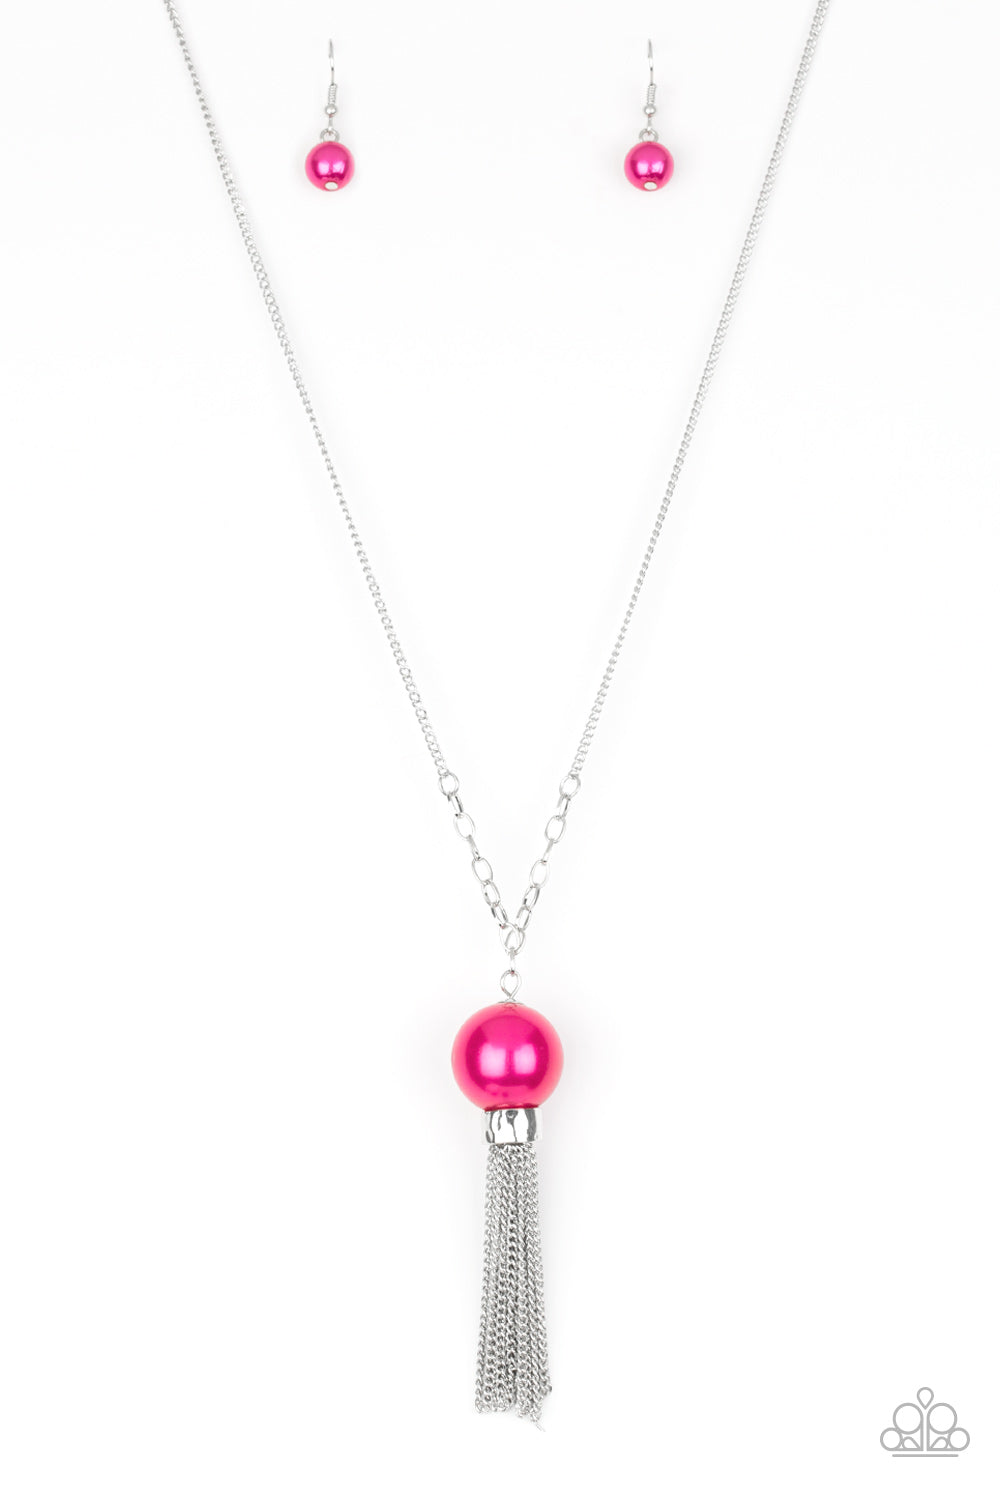 Belle of the BALLROOM - Pink Paparazzi Jewelry-219